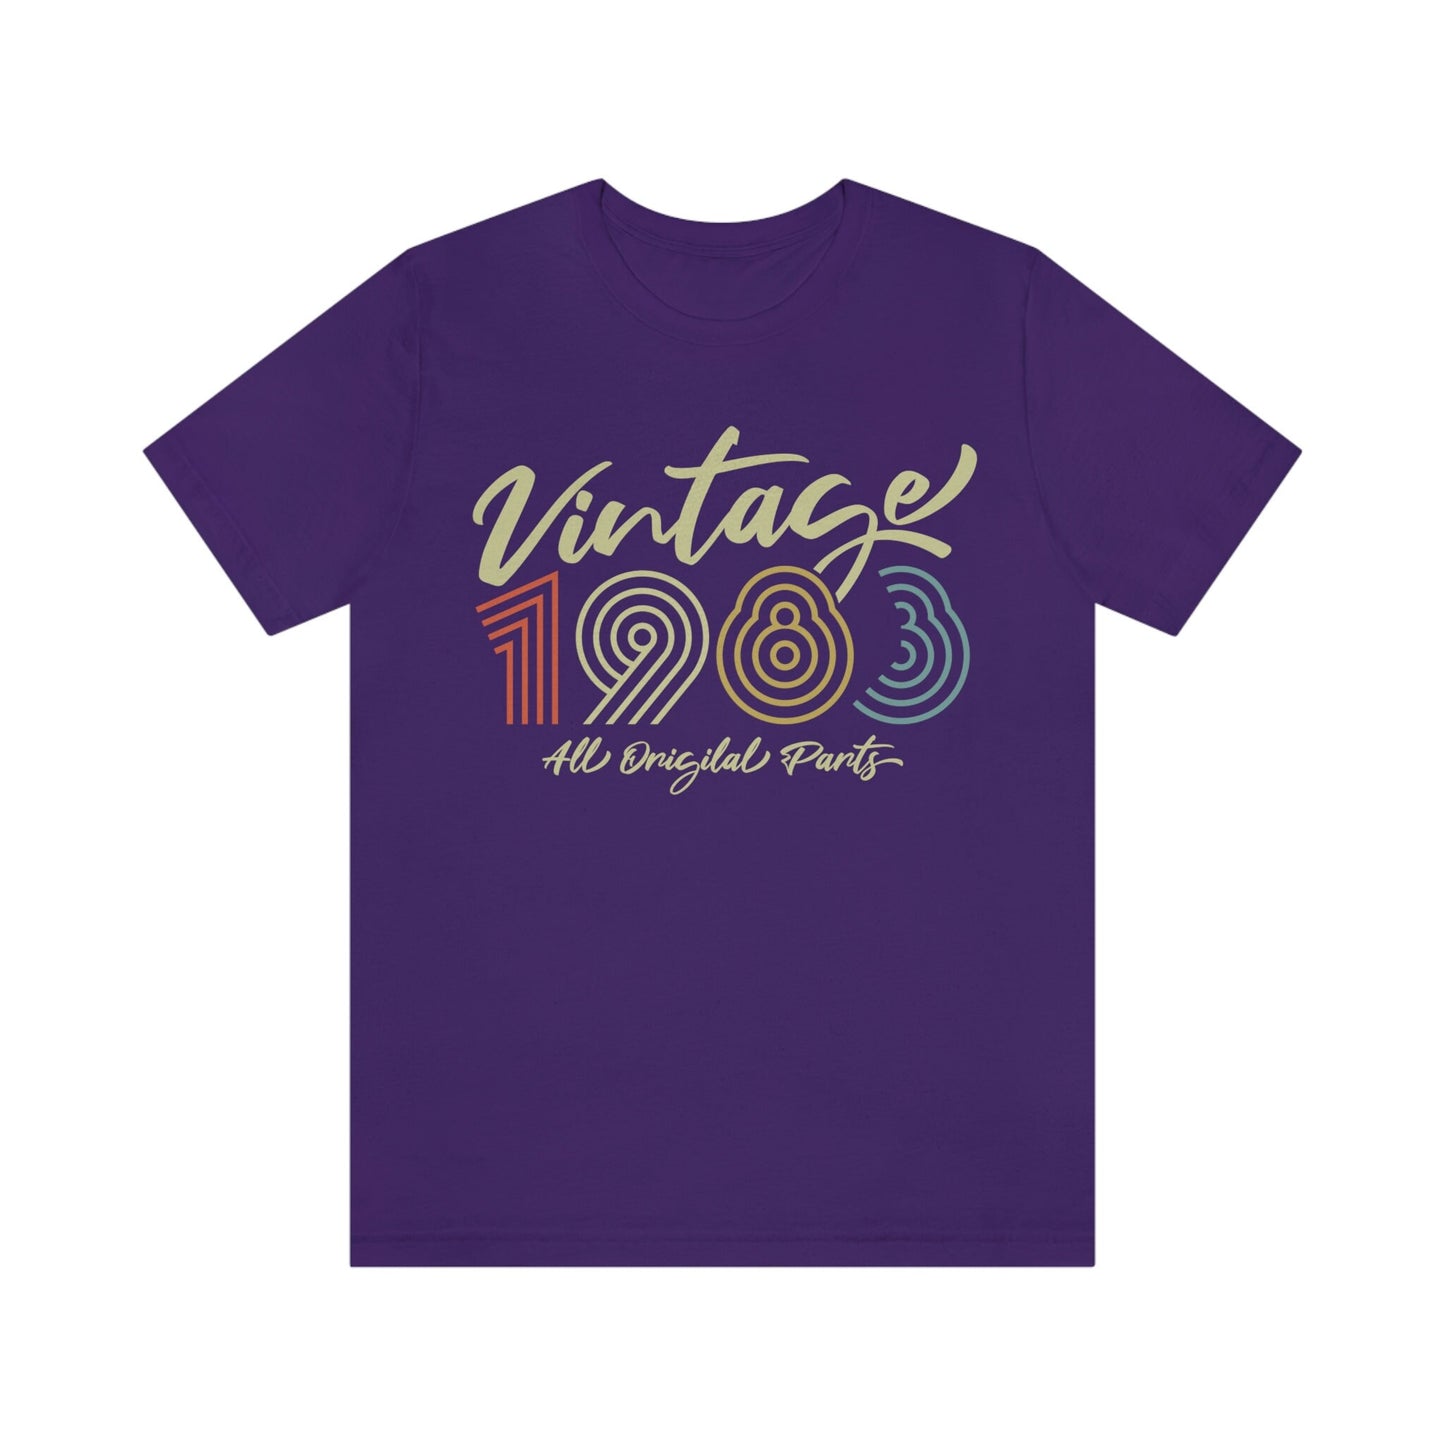 Vintage 1983 birthday shirt for men or women, Birthday Gift shirt for wife or husband